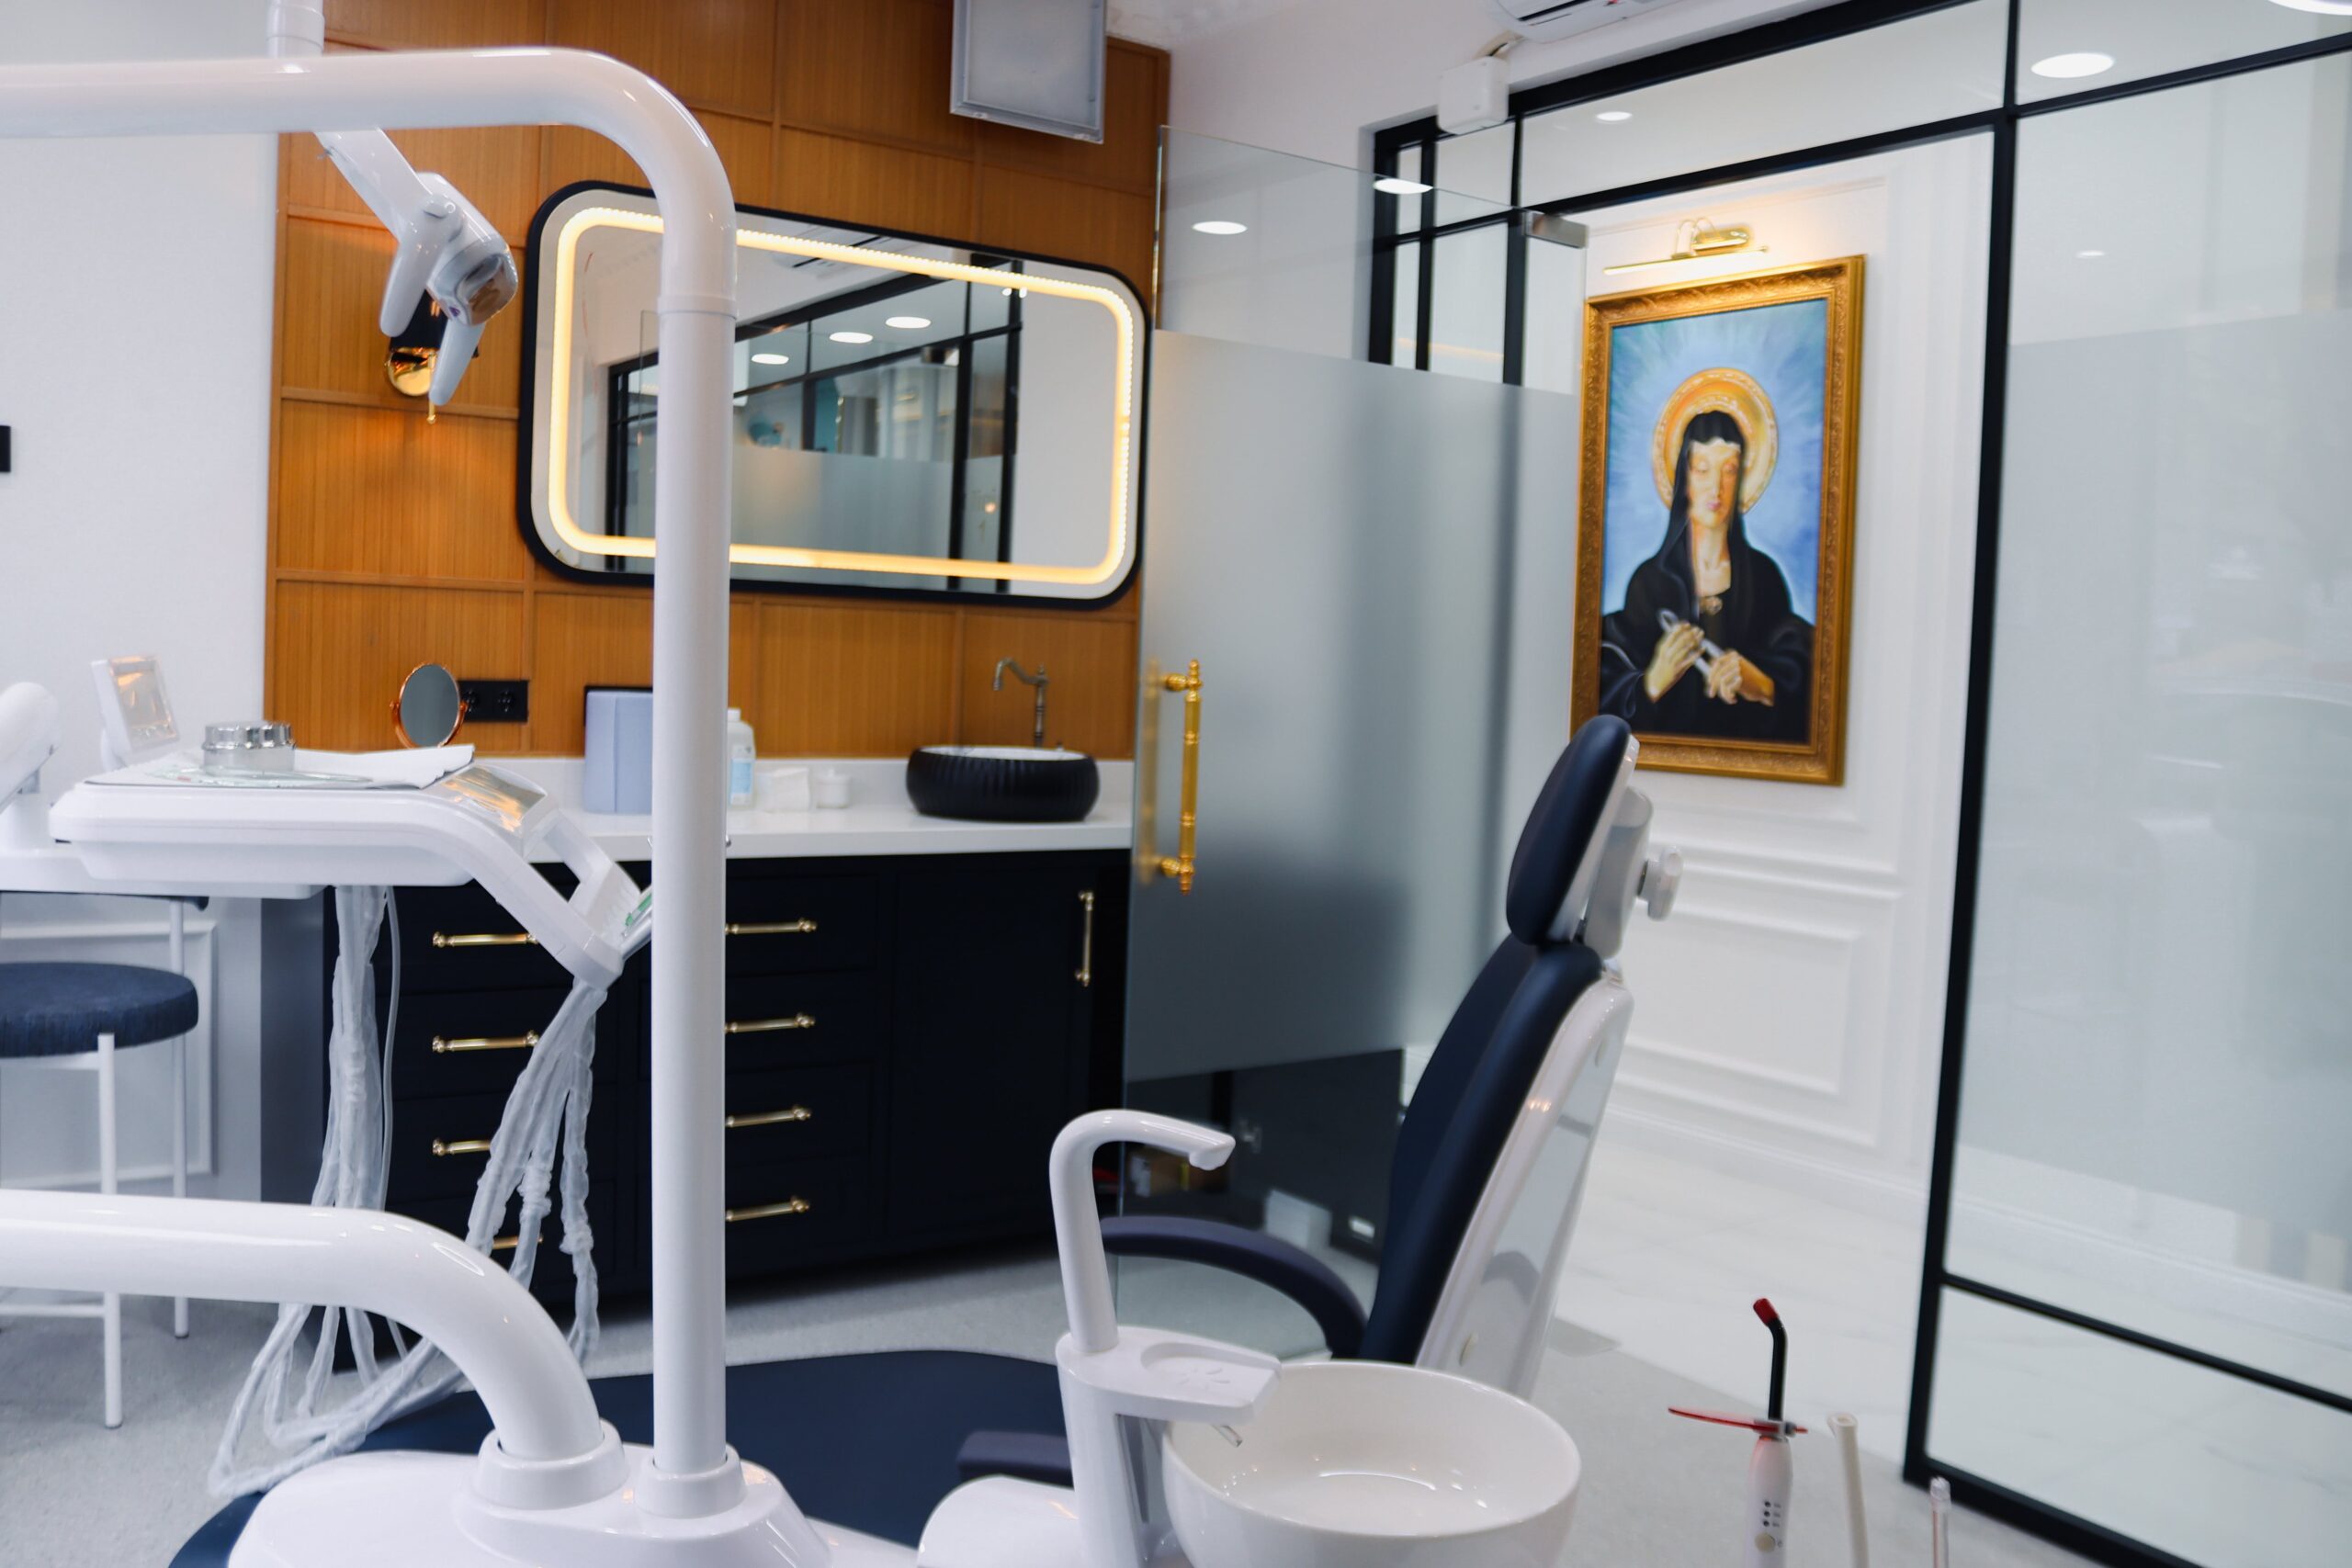 dental-chair-facing-back-with-portrait-on-the-wall.jpg